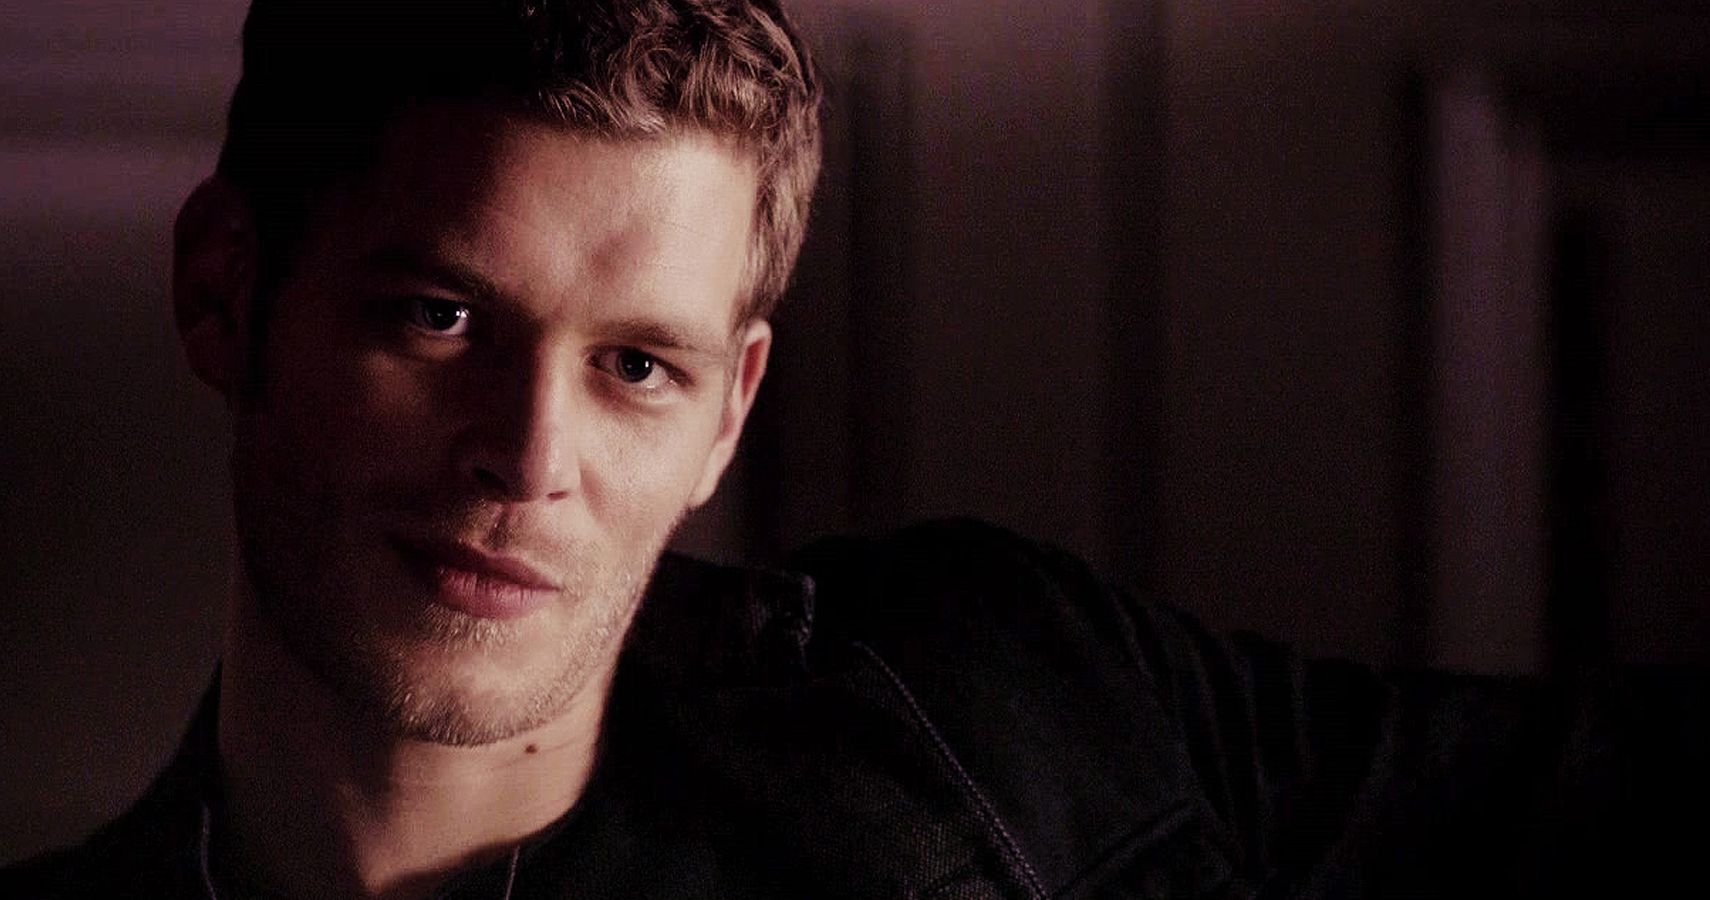 The Originals: 20 Things That Make No Sense About The Show